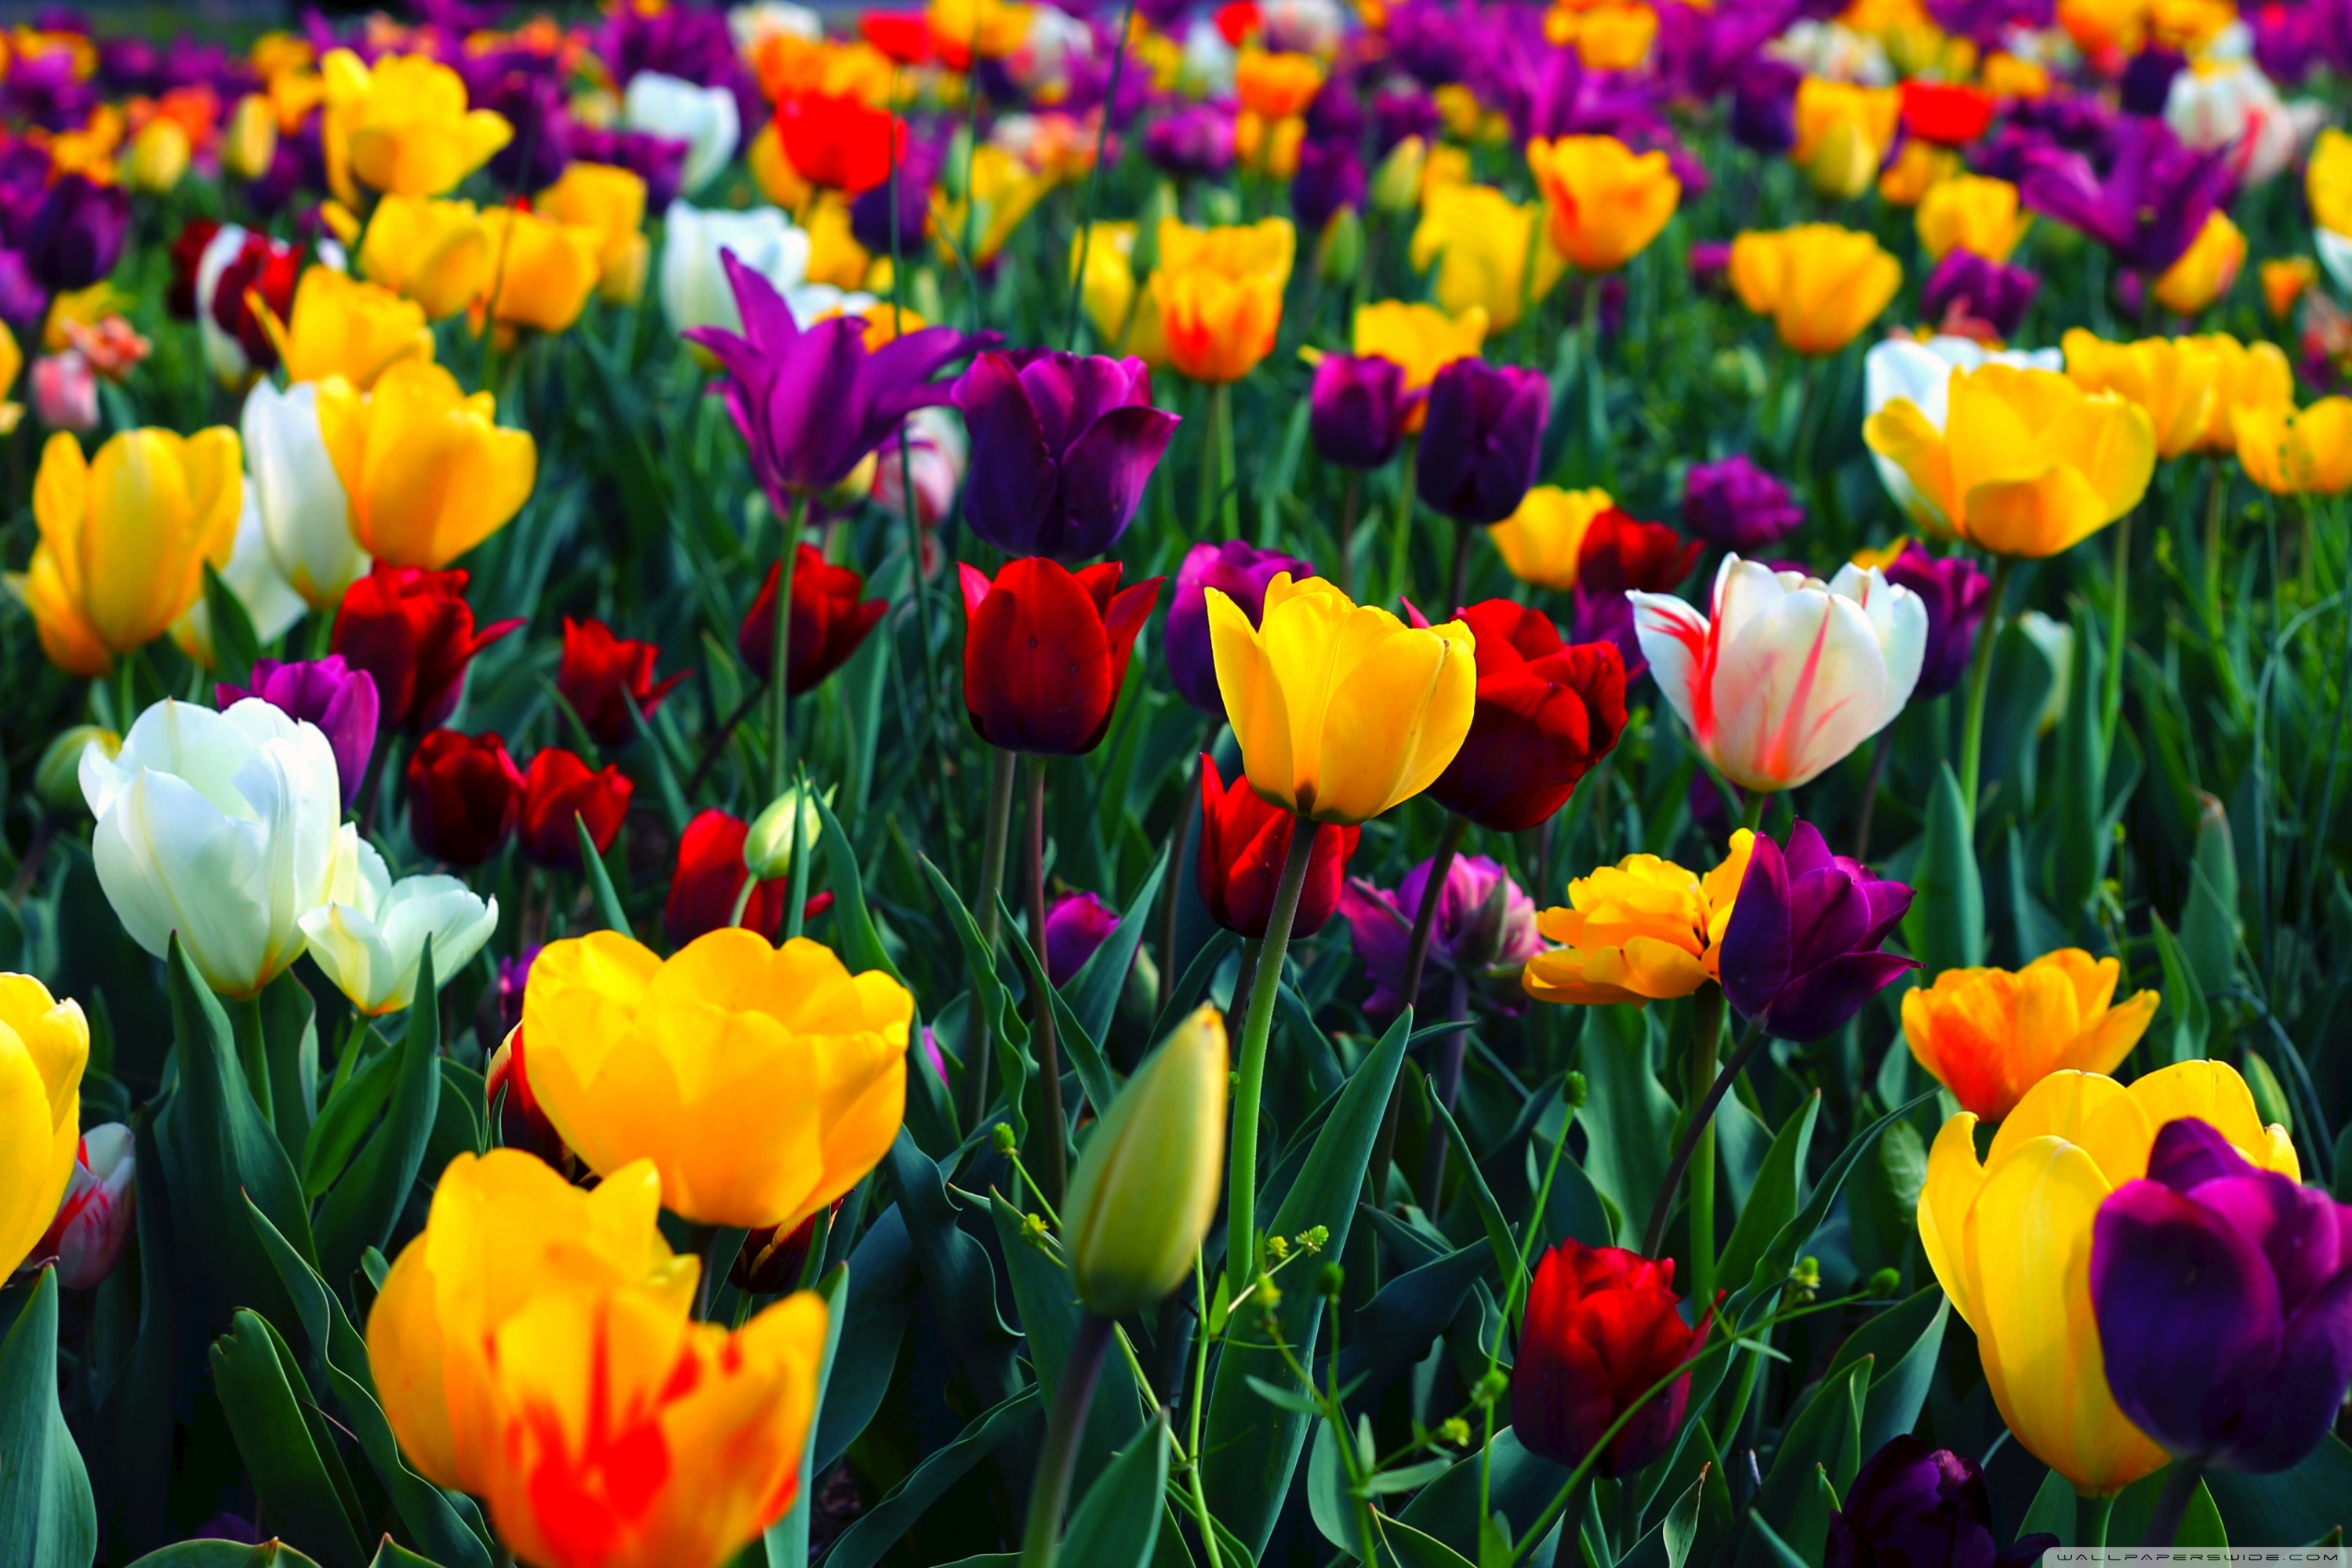 Colorful Flowers Ultra HD Desktop Background Wallpaper for: Multi Display, Dual Monitor, Tablet